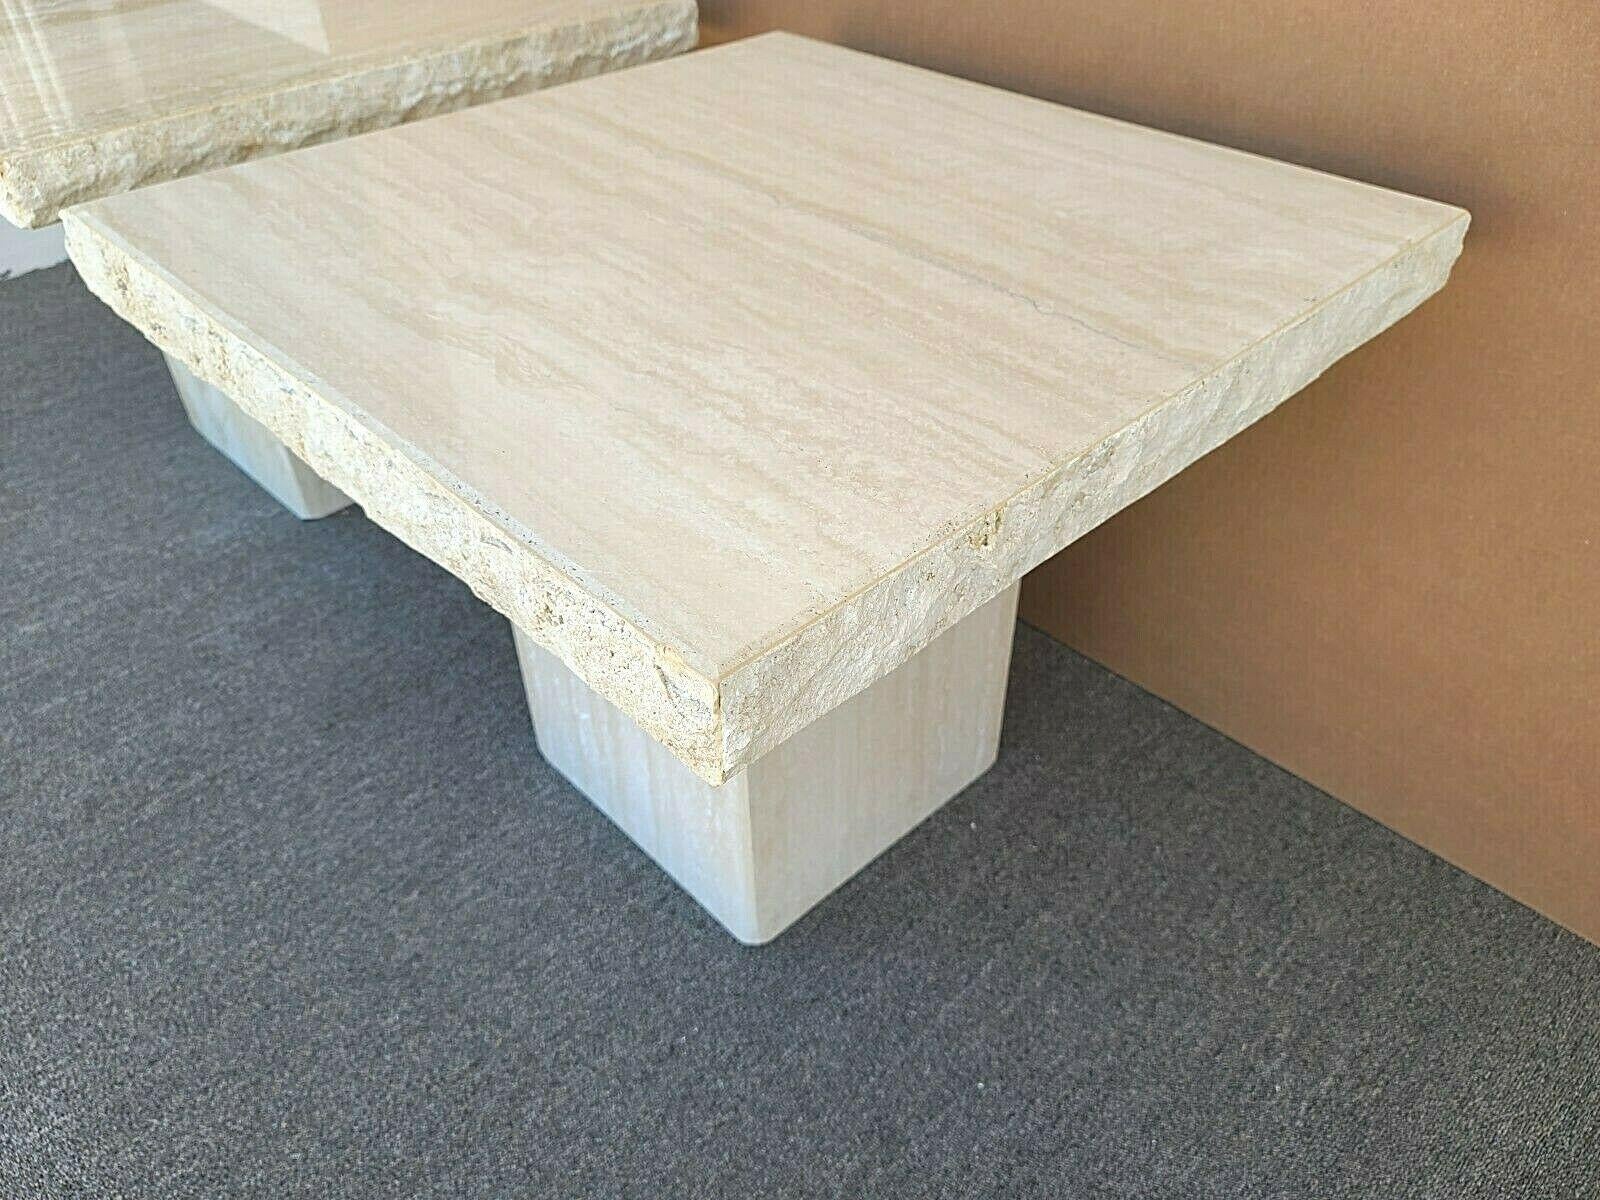 Offering One Of Our Recent Palm Beach Estate Fine Furniture Acquisitions Of 
A Pair of Signed 1970's Post Modern MCM STONE INTERNATIONAL Italian Polished Travertine Live Edge Marble Side End Tables
With large secret compartments inside the tops of